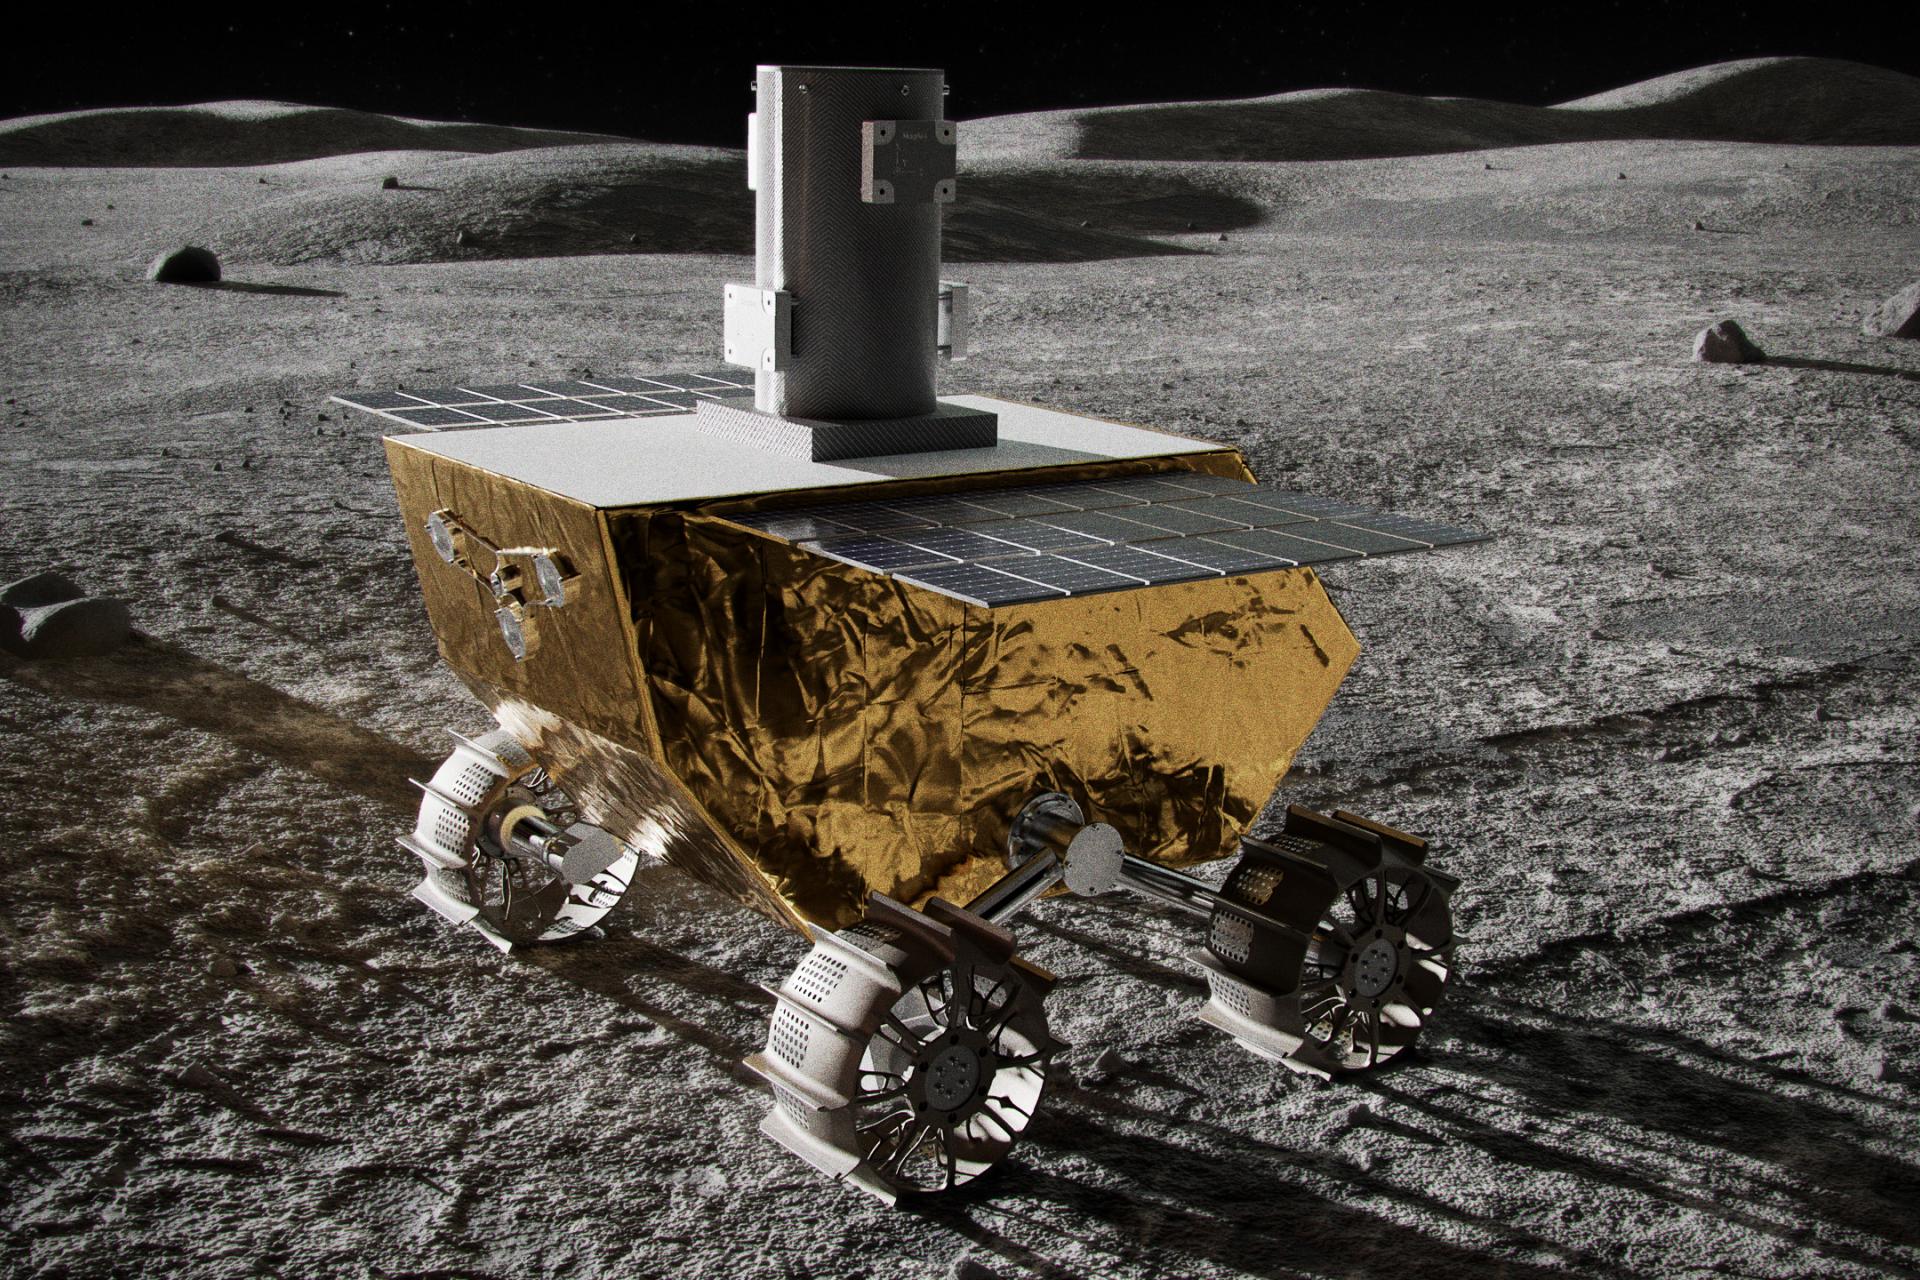 Artist’s impression of the Lunar Vertex rover on the surface of the Moon